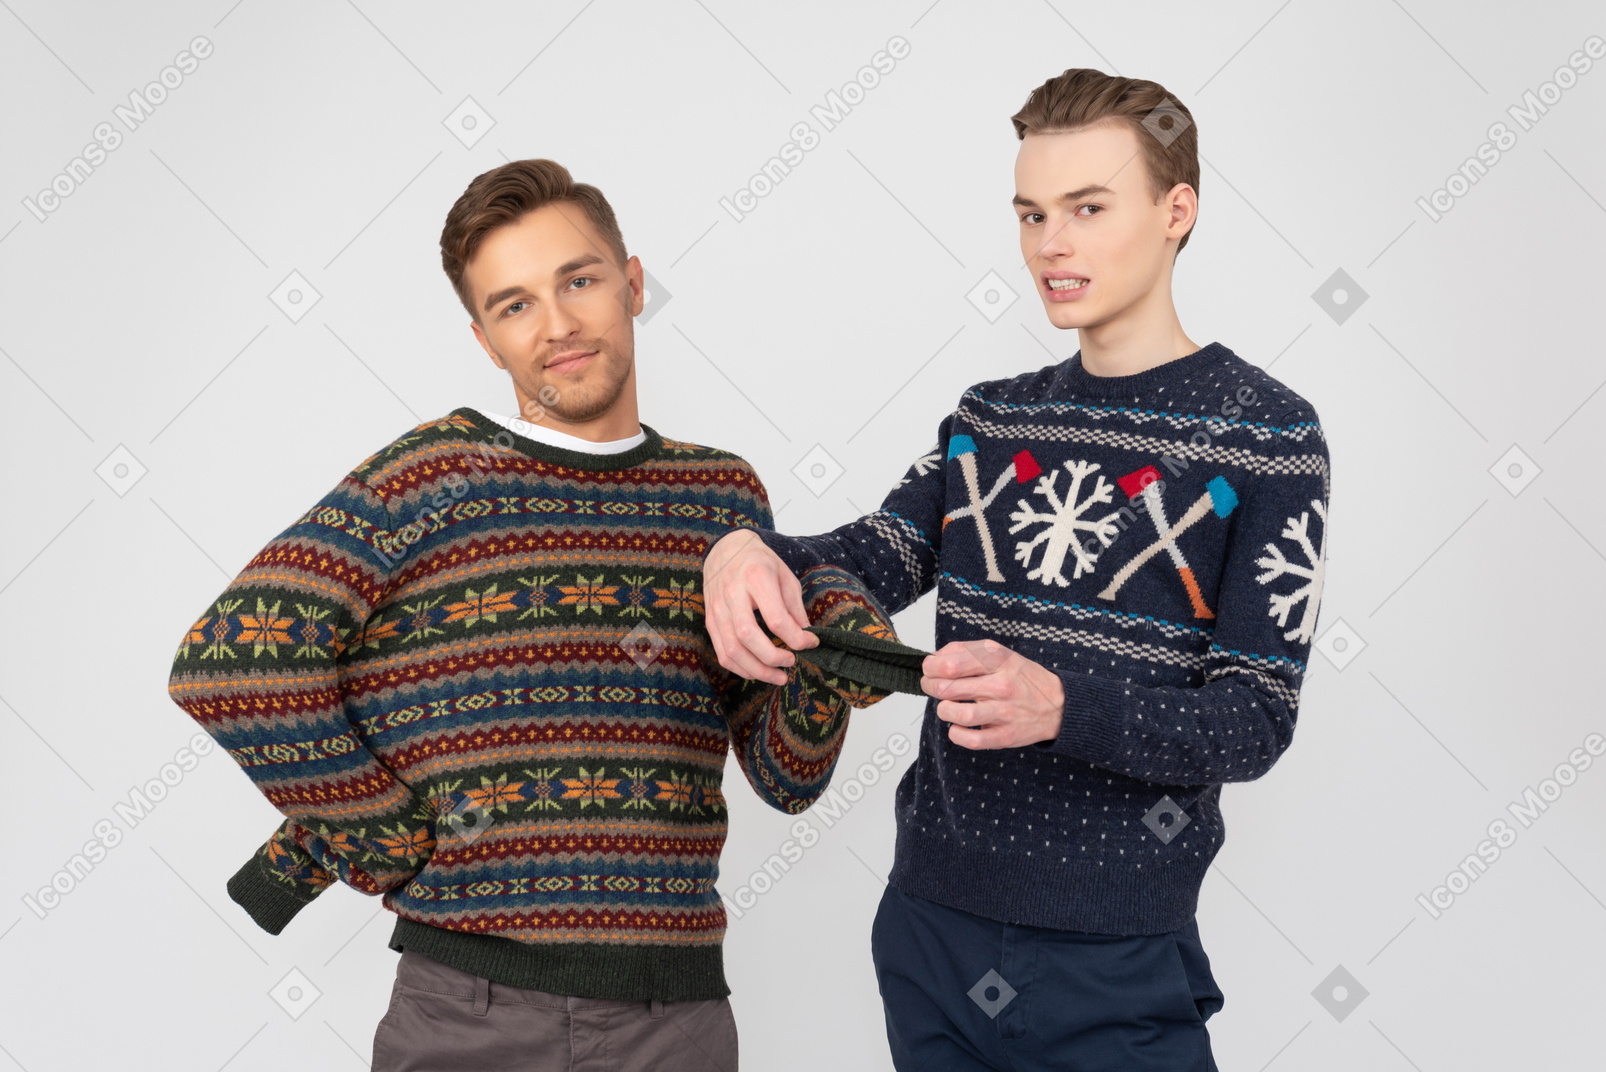 Man trying to fix his brother's sweater sleeve